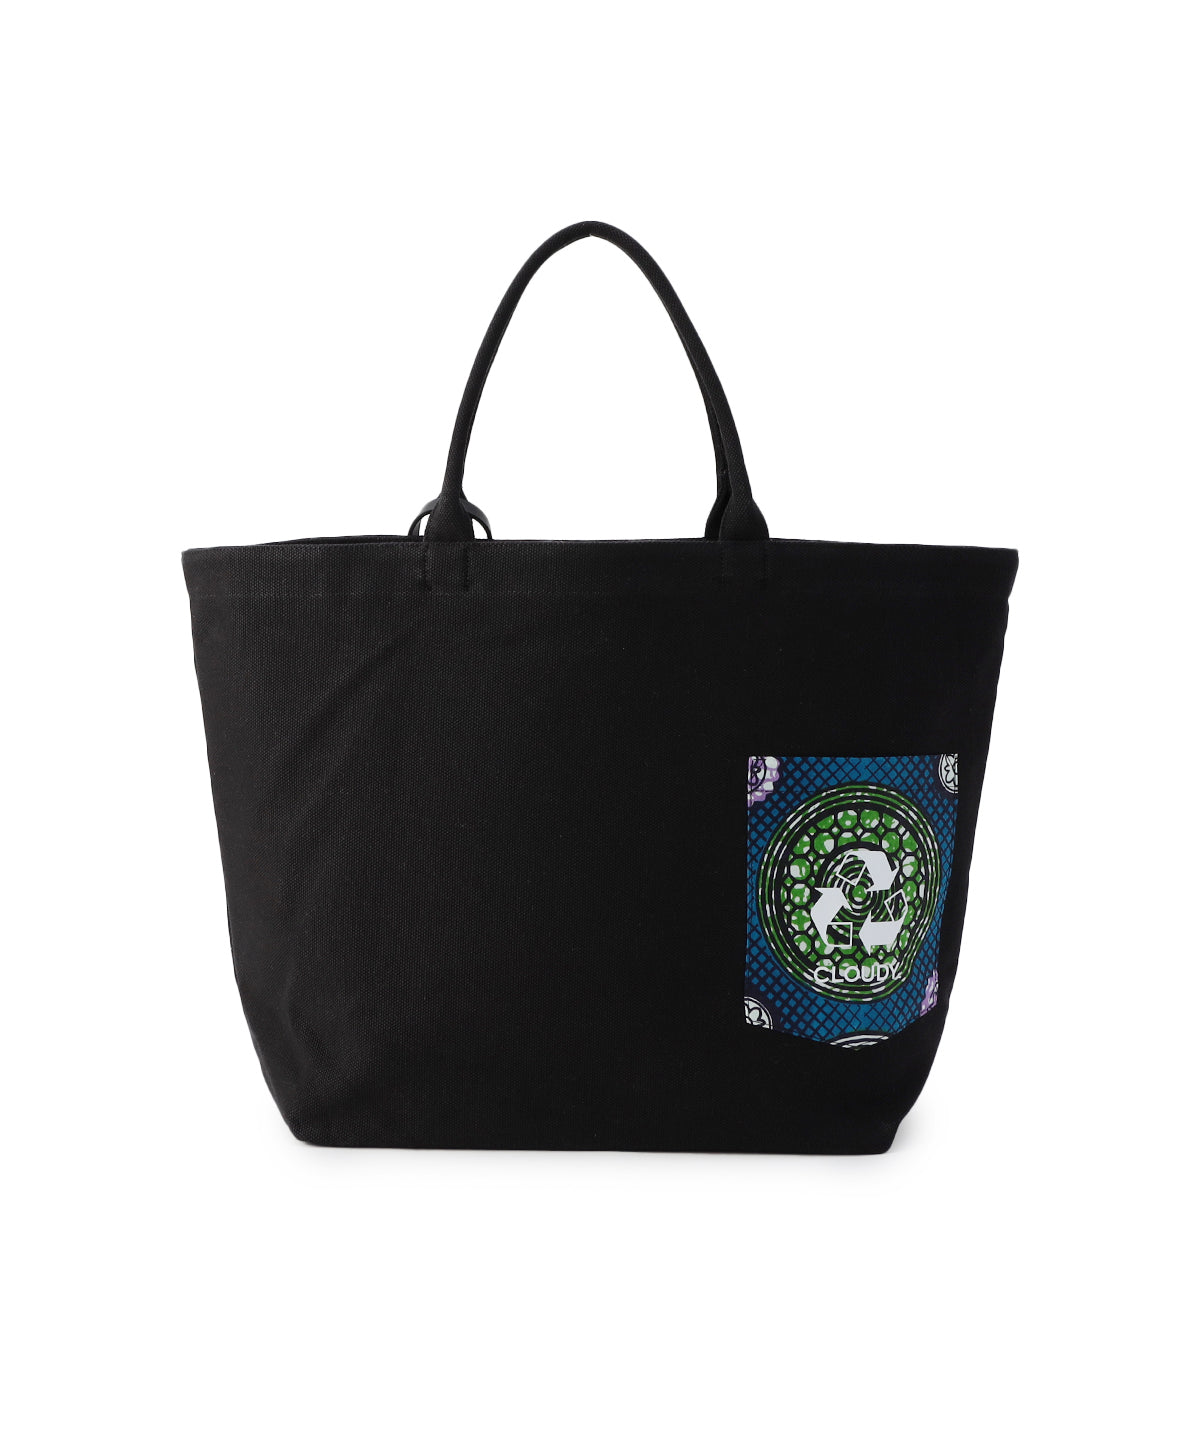 Colored Canvas Tote (Large) BLACK